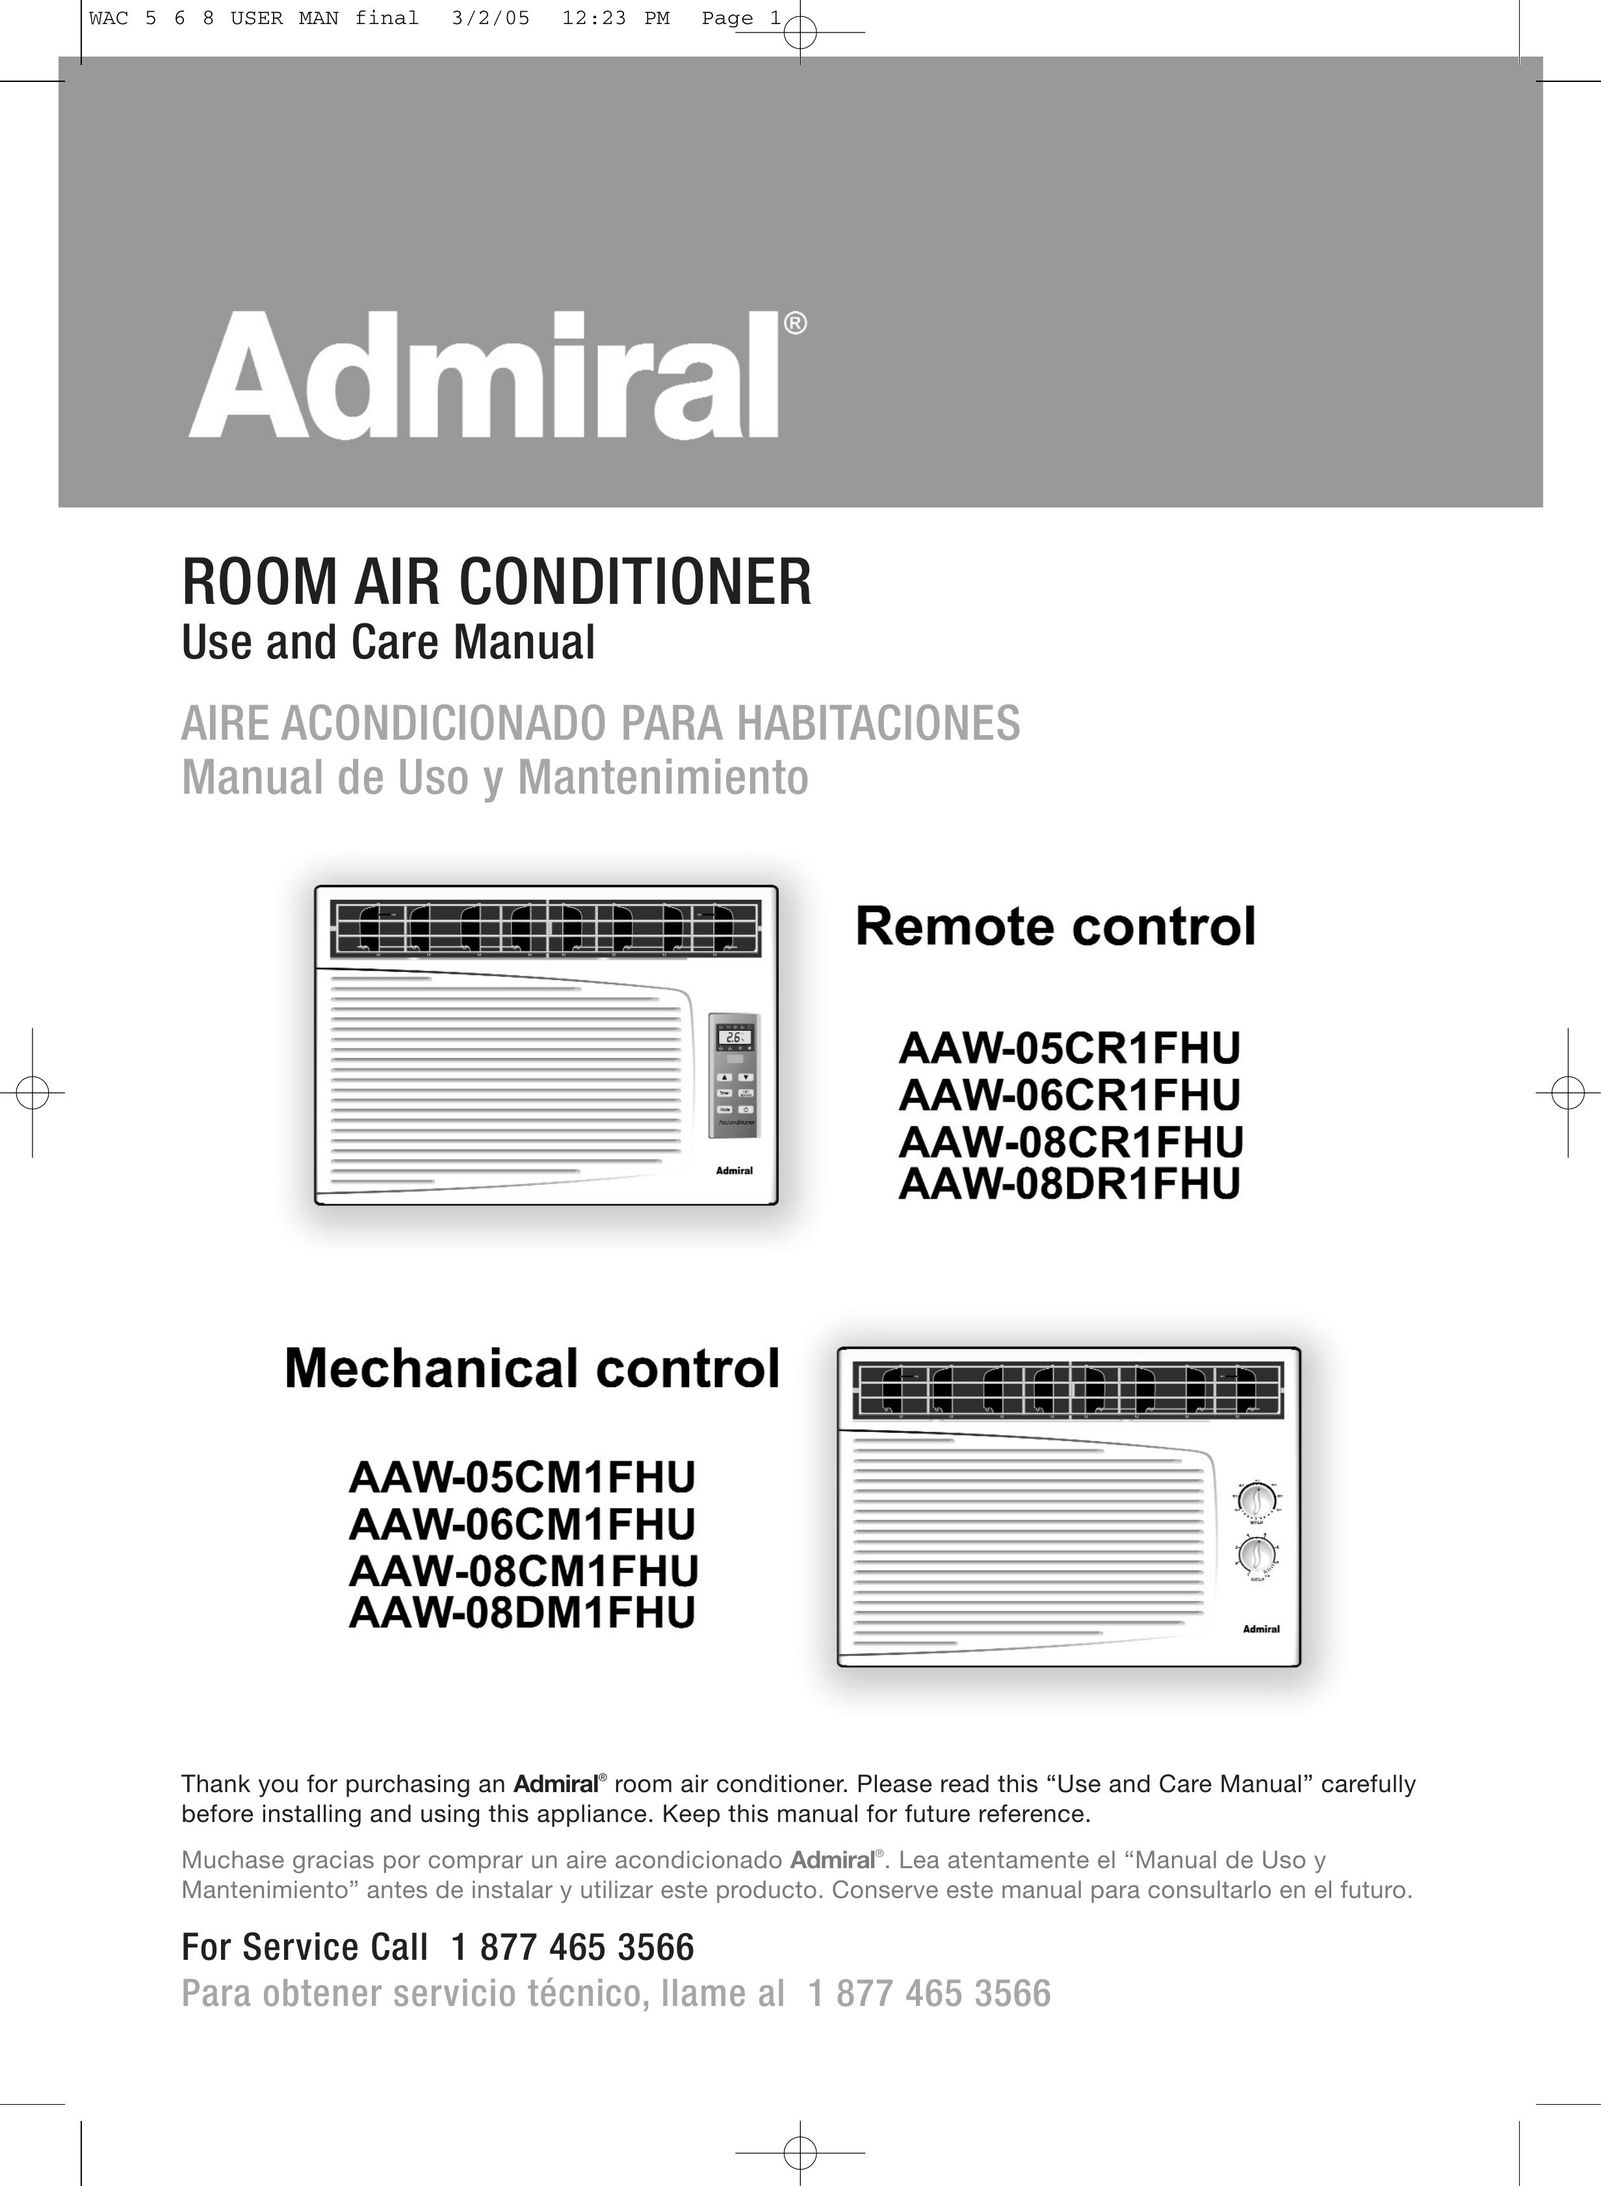 Admiral AAW-06CR1FHU Air Conditioner User Manual